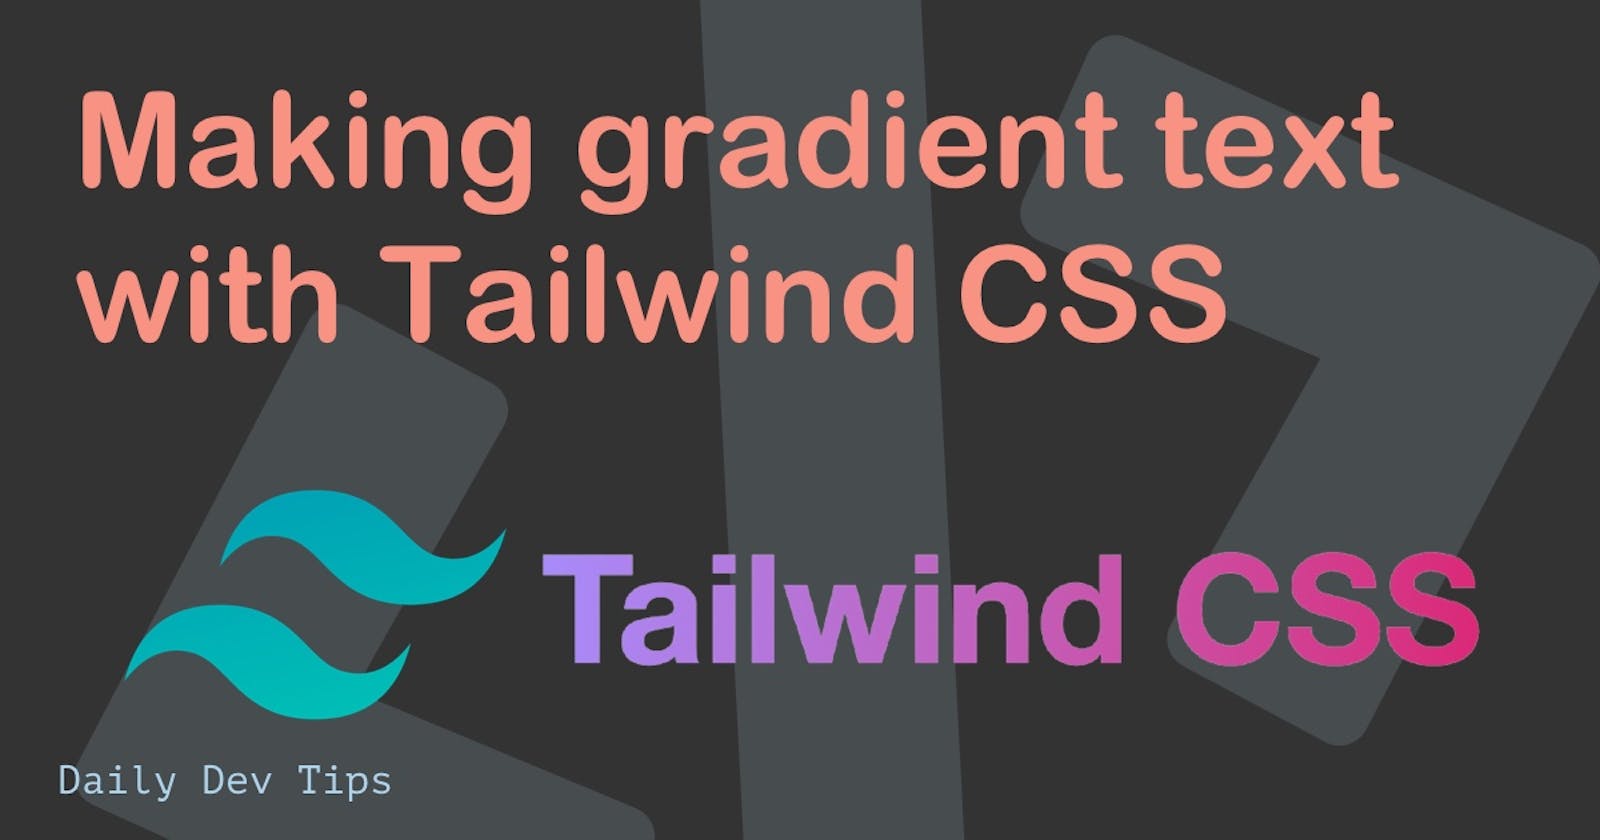 Making gradient text with Tailwind CSS